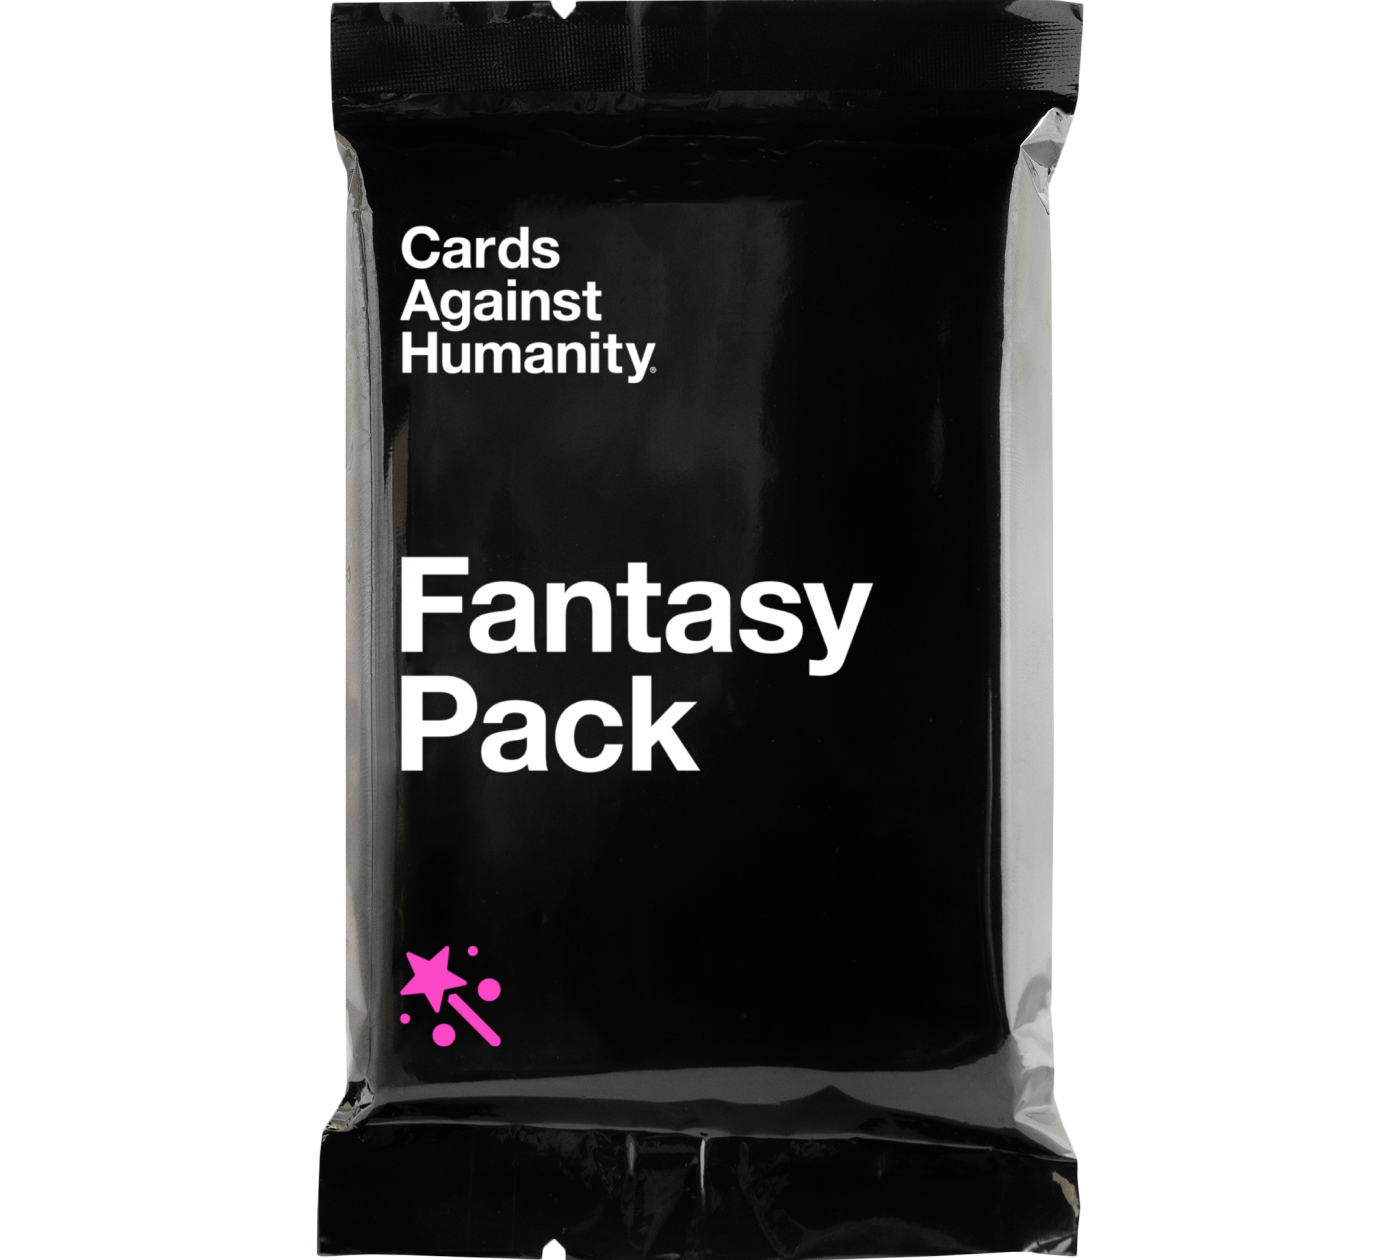 Cards Against Humanity Brand New Sealed Original Expansion Pack Period Pack 